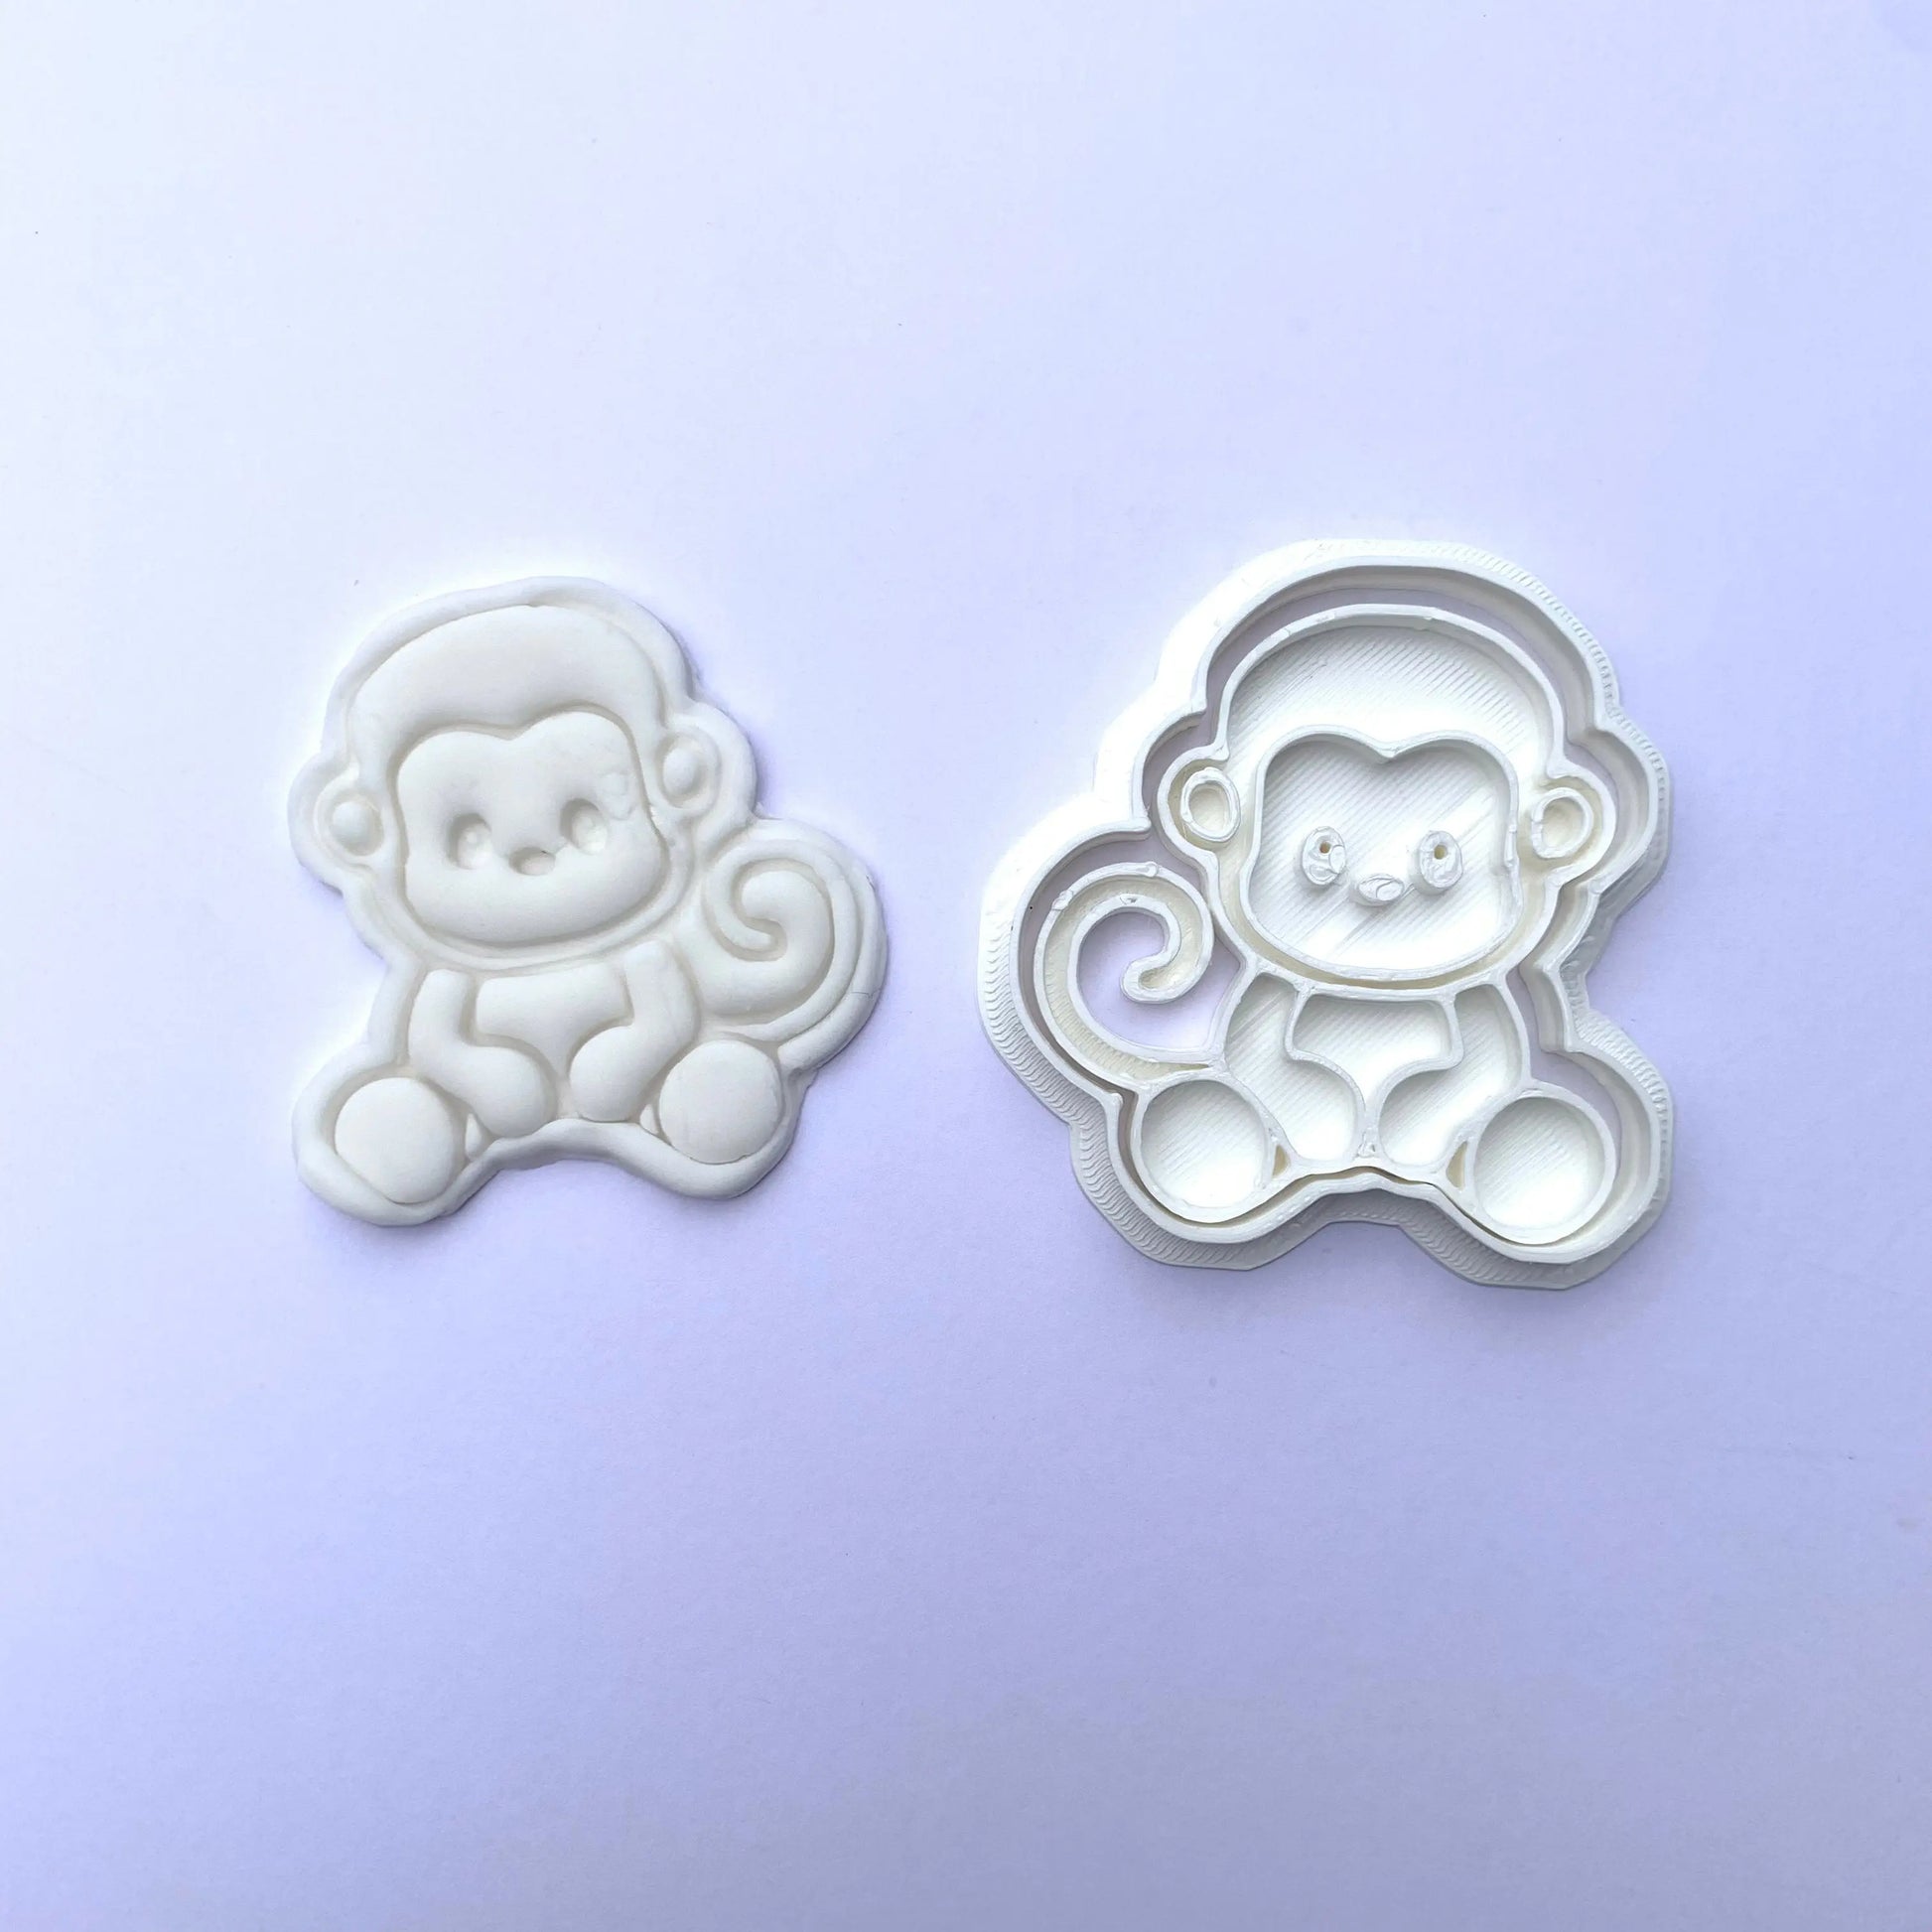 Monkey - animal - cookie cutter + stamp MEG cookie cutters